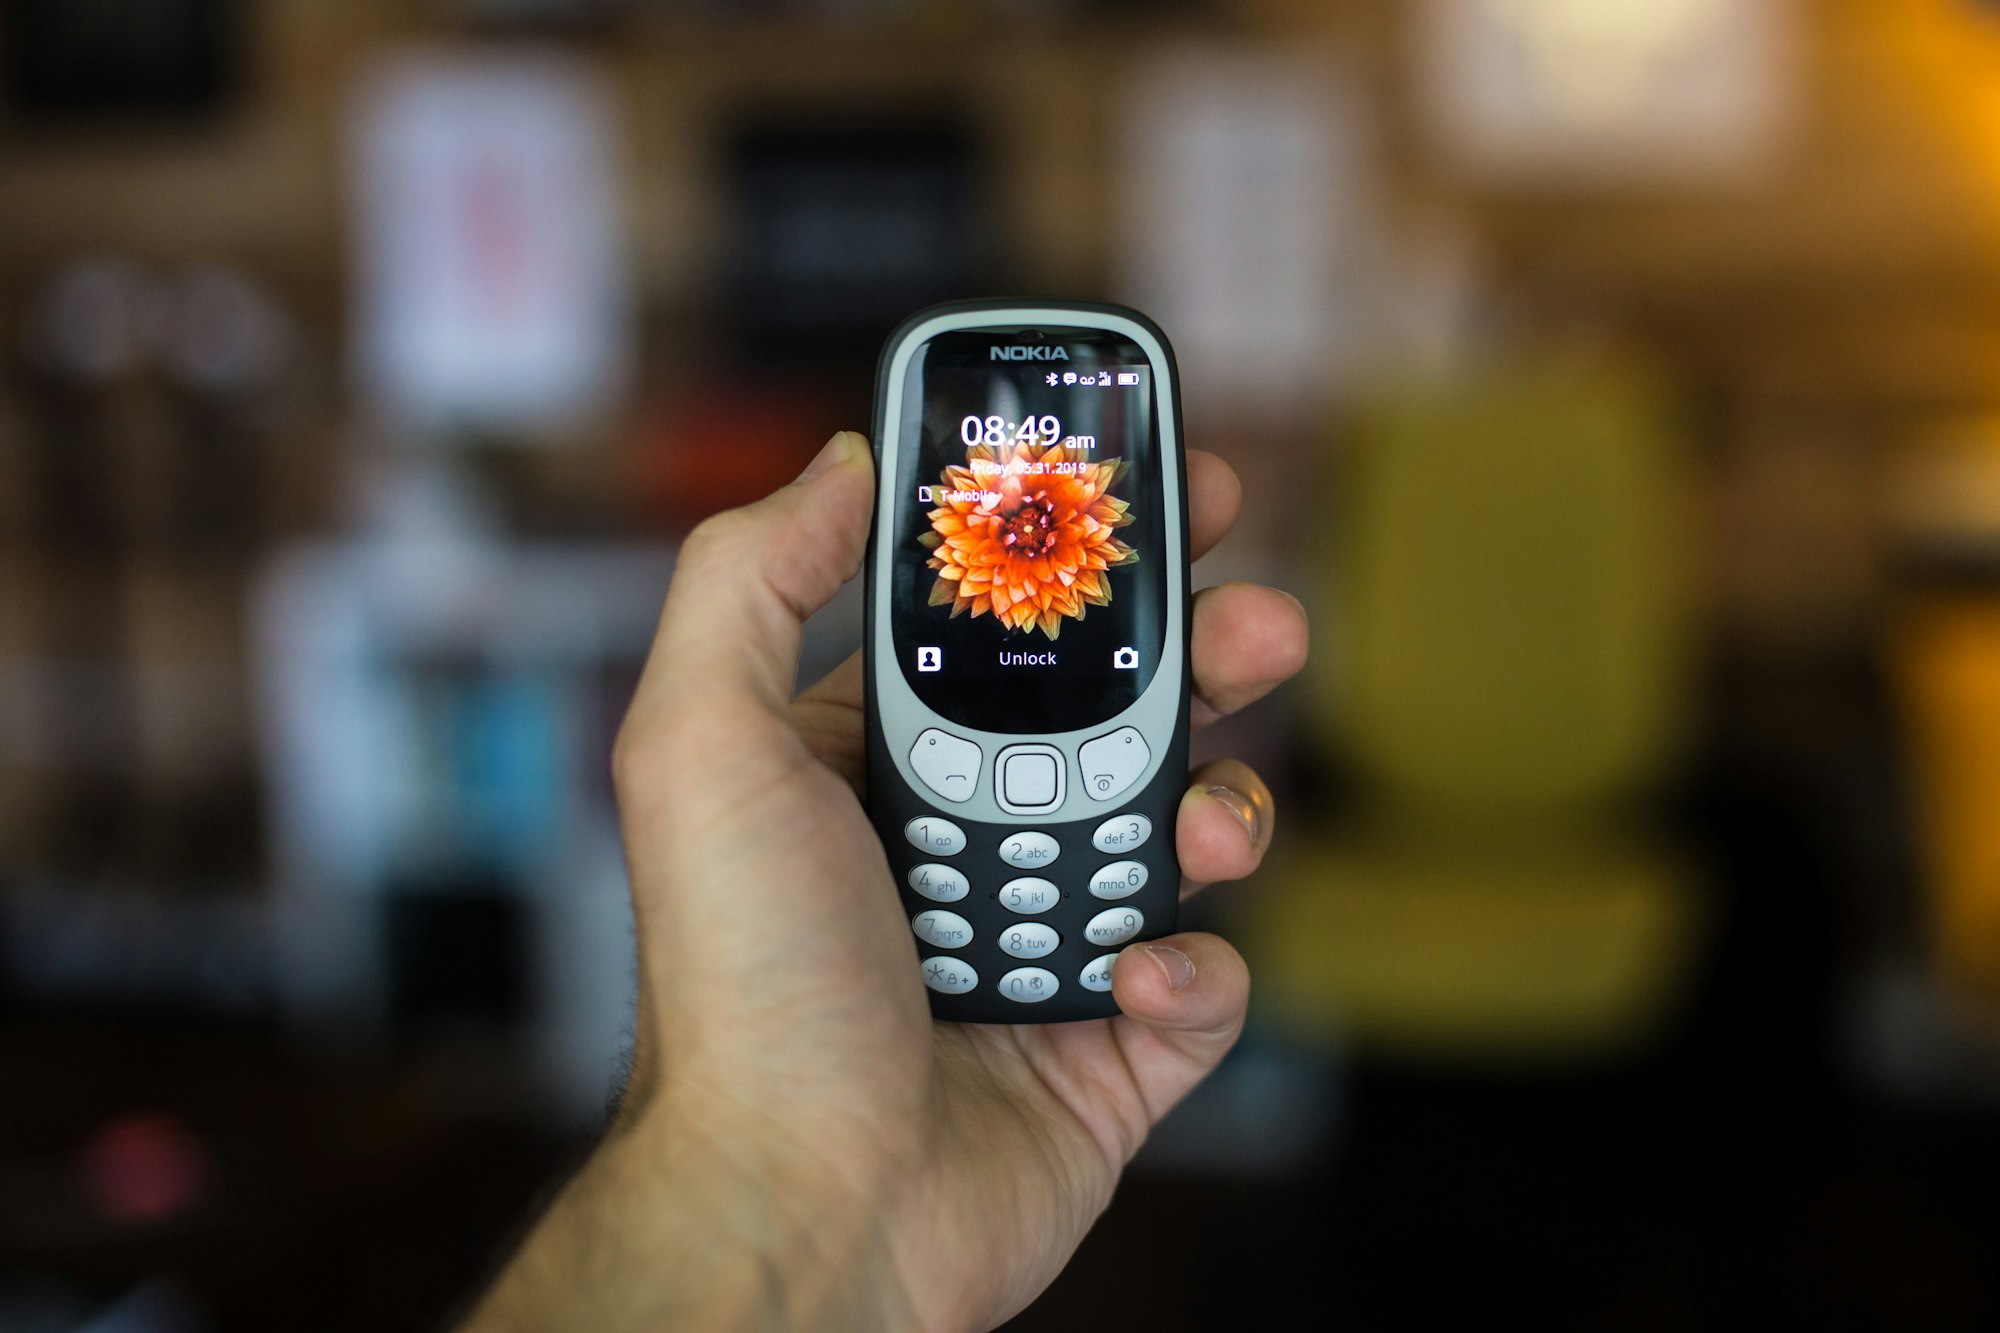 Hong Kong-based KaiOS targets the African market with $3.4 million in funding